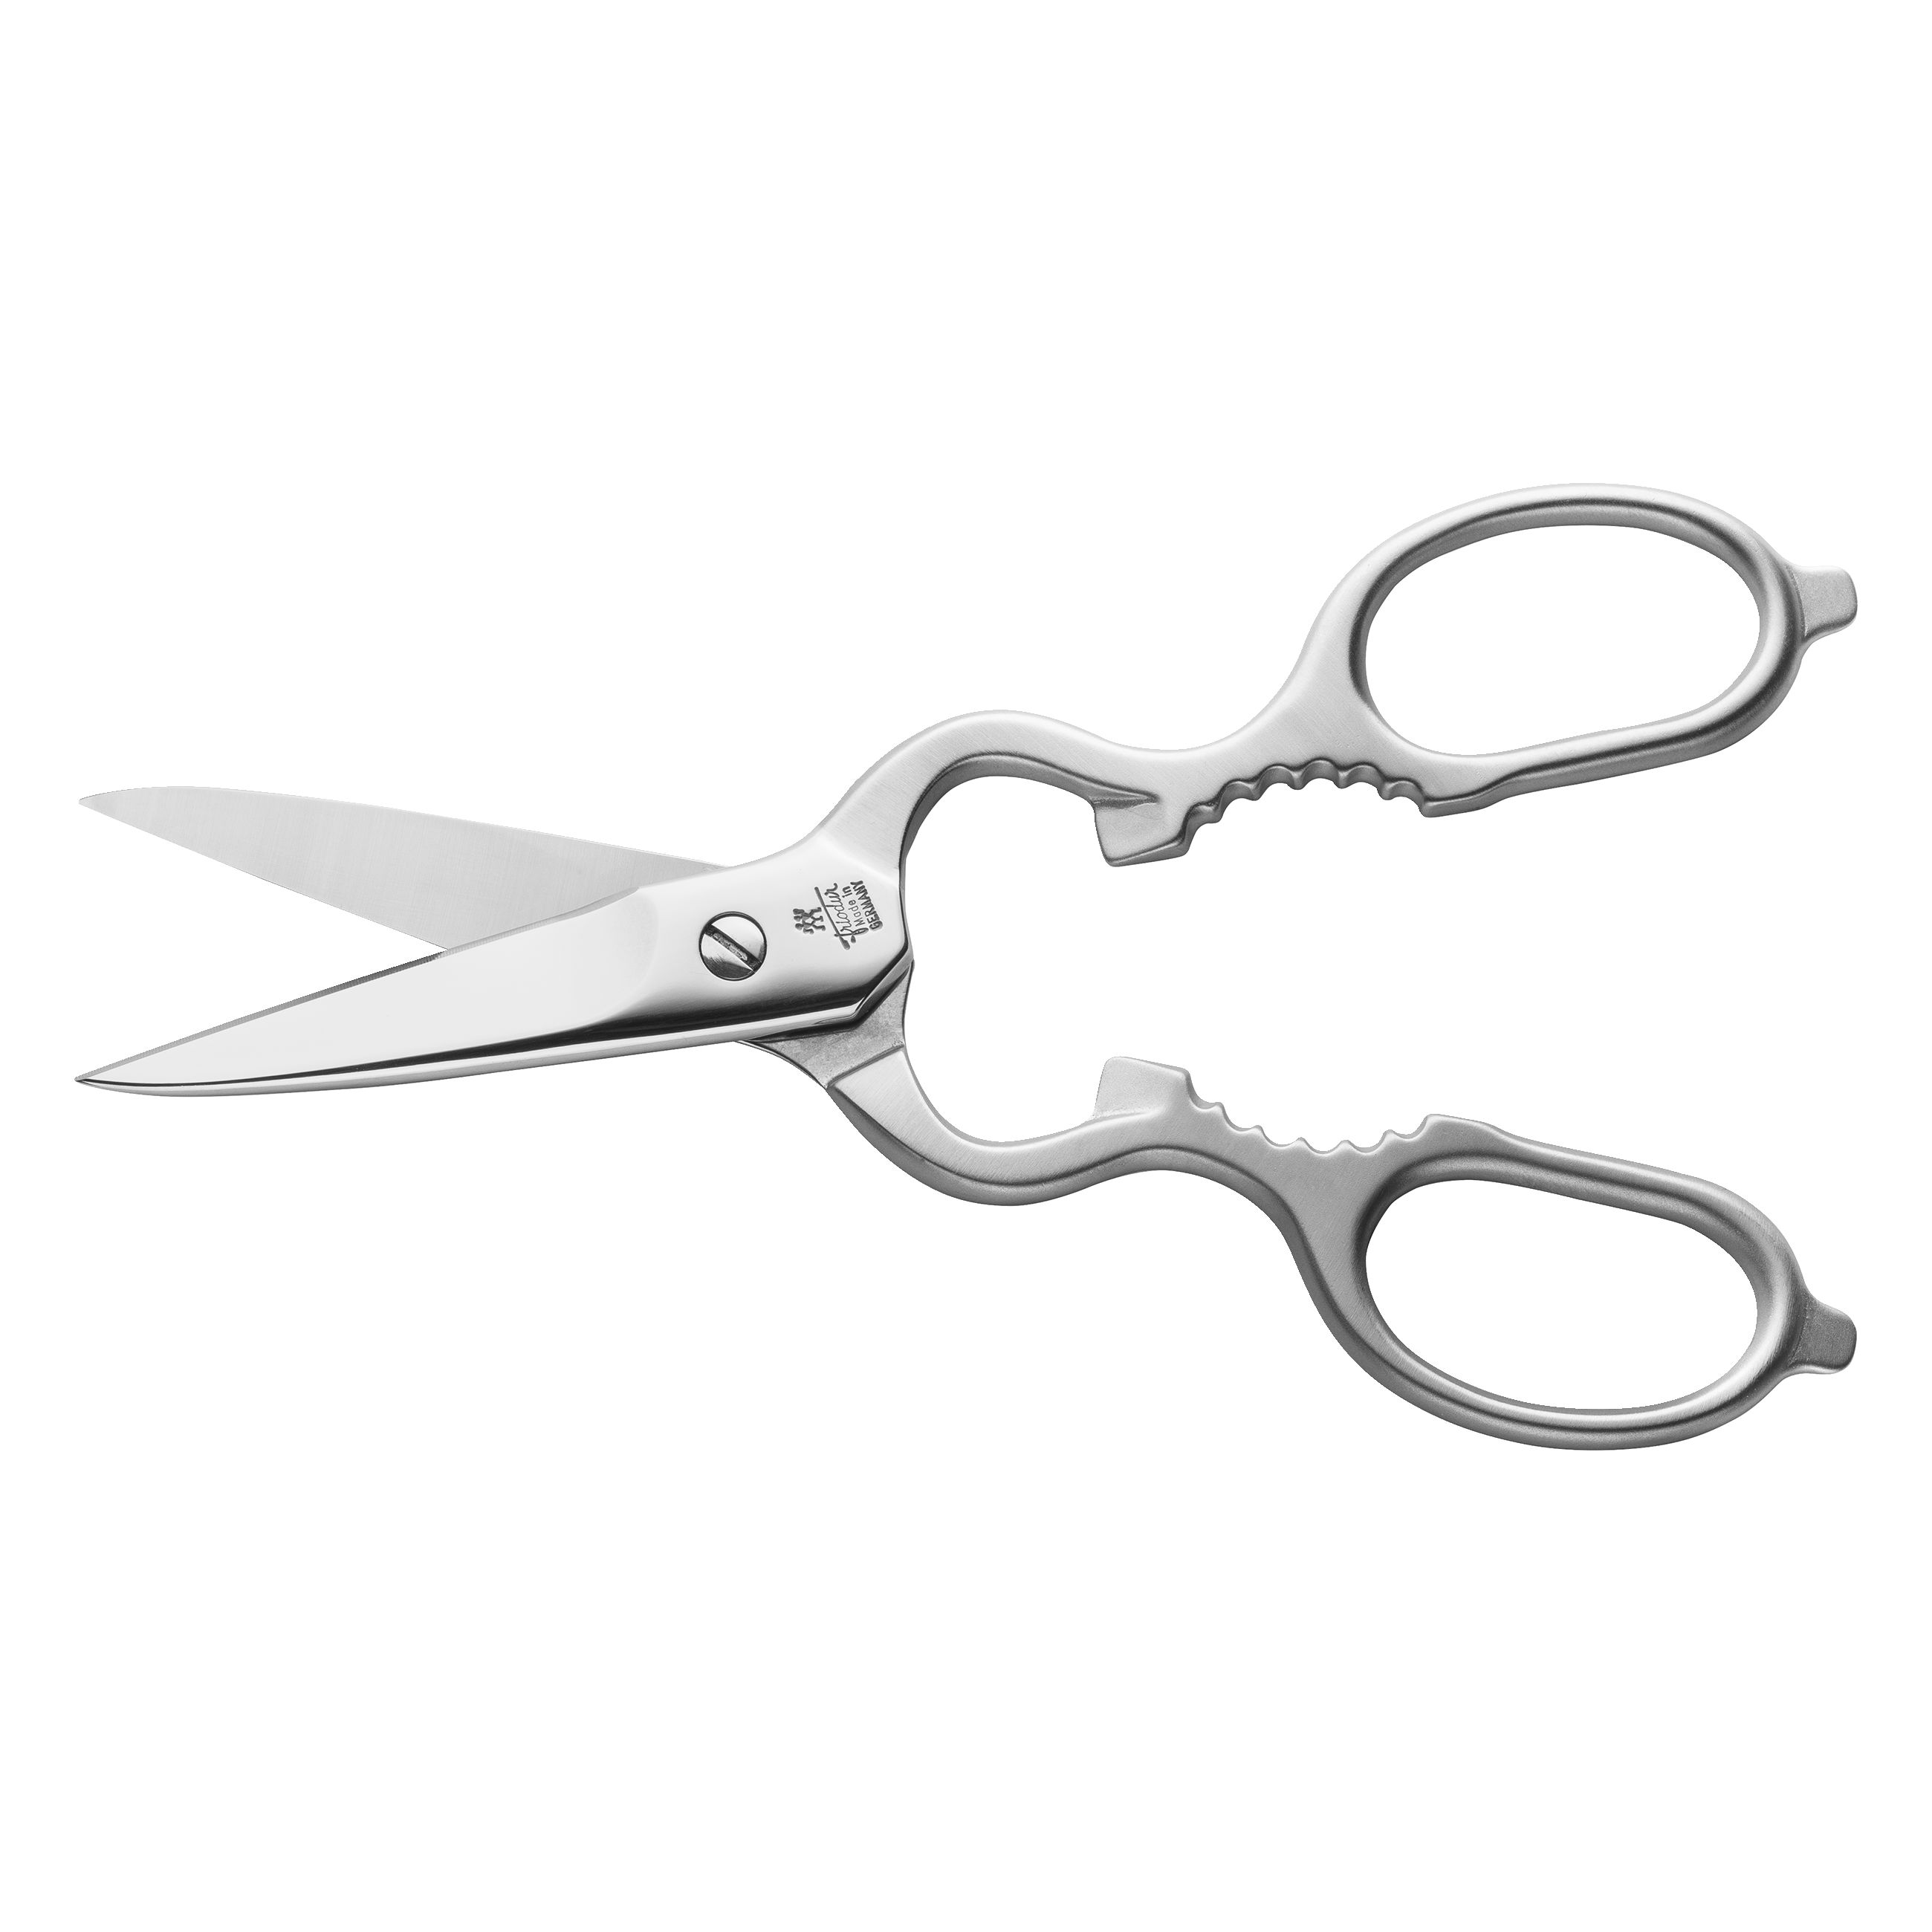  Zwilling 43923-200 Classic Cooking Scissors, Satin, Stainless  Steel, Kitchen Scissors, Made in Germany : Home & Kitchen